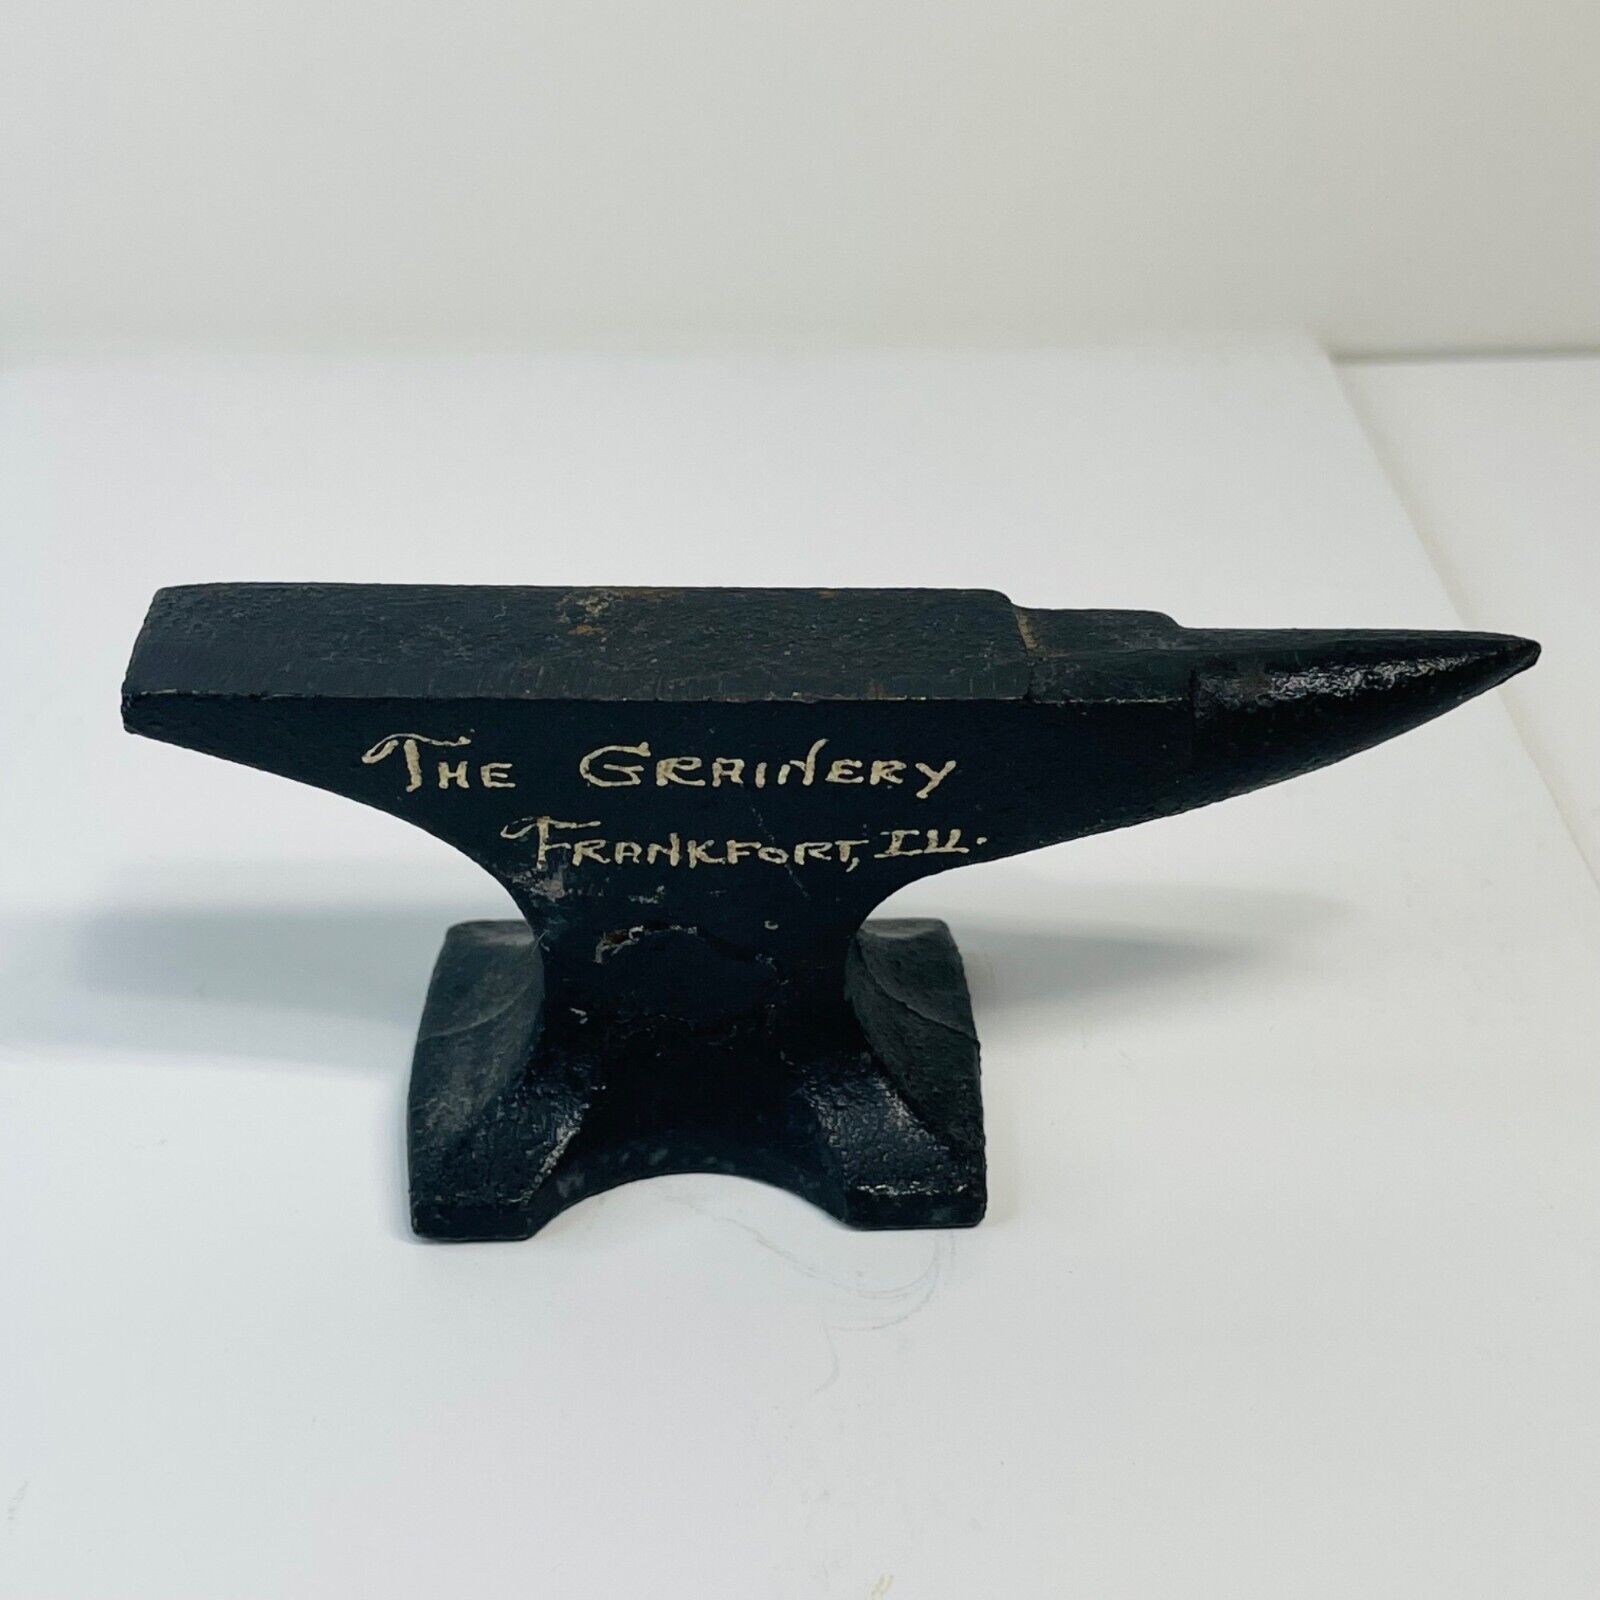 Vintage Mini cast iron Anvil Advertising The Grainery Frankfort, ILL